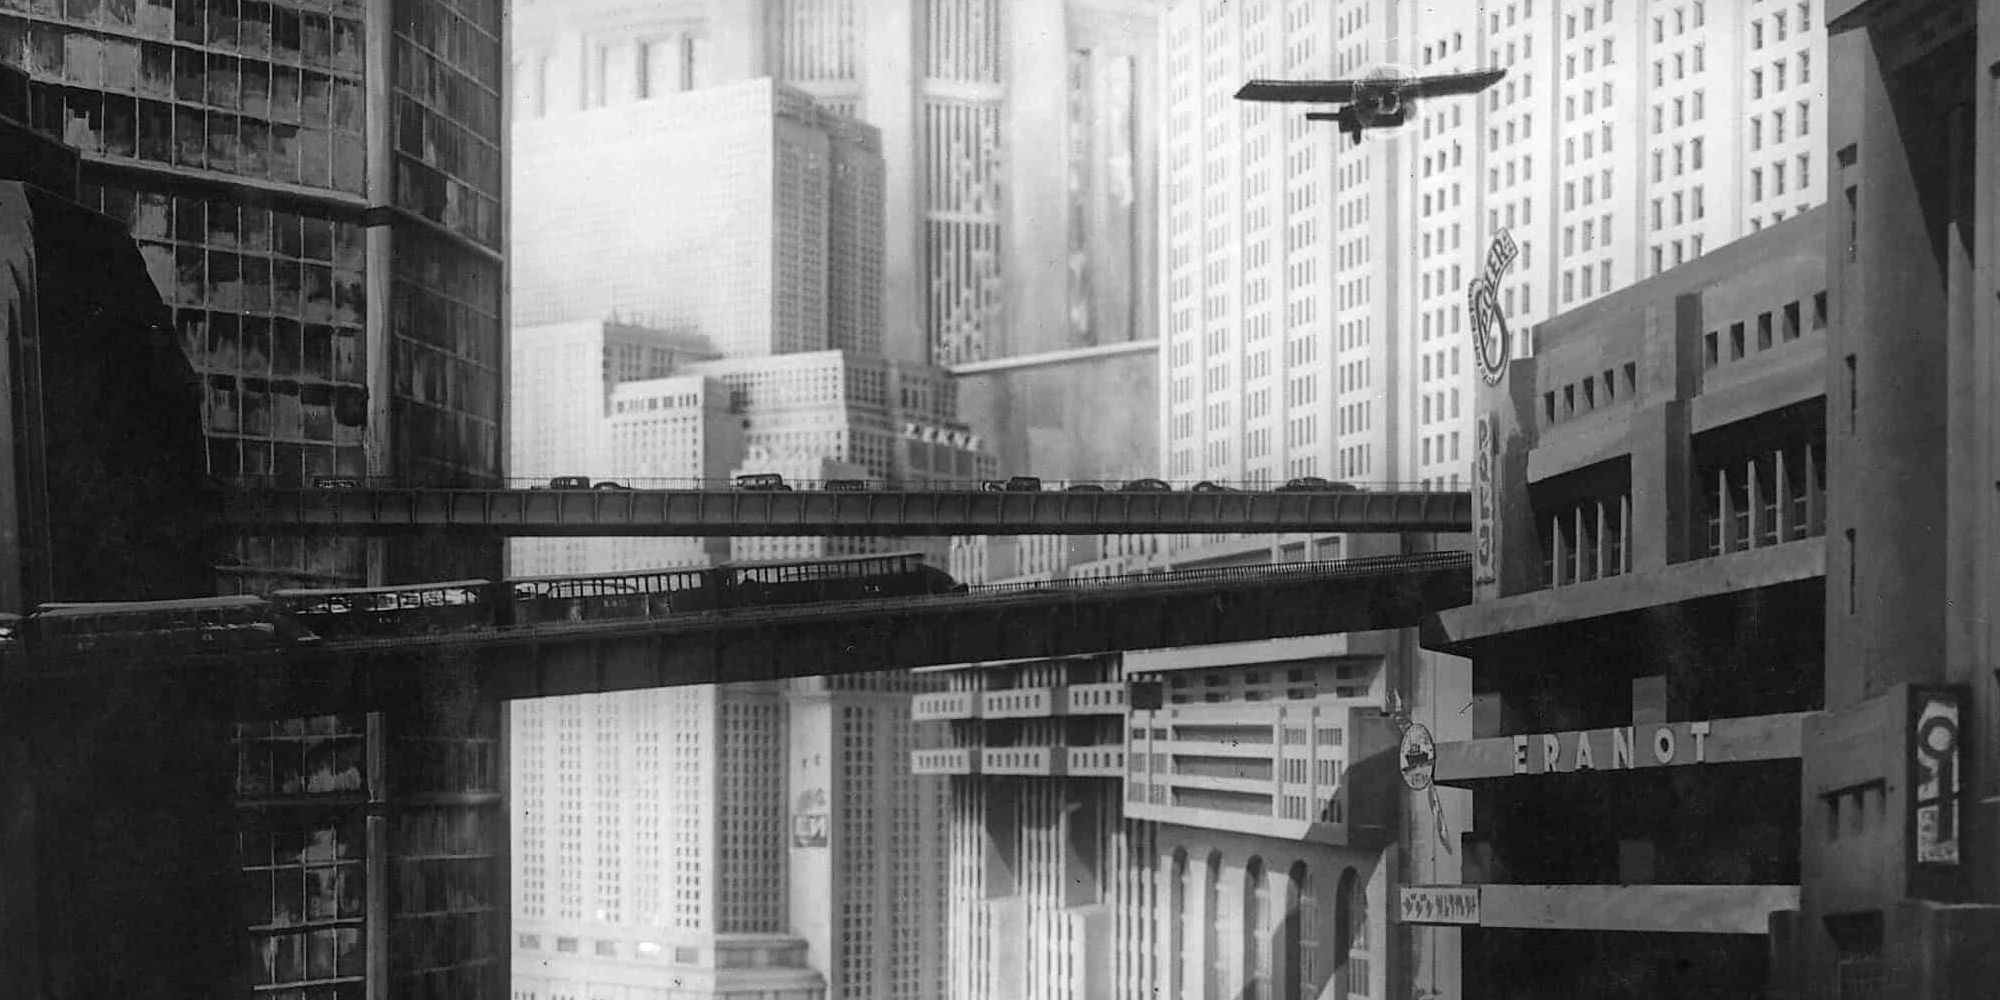 the huge futuristic city of Fritz Lang's "Metropolis", with cars, a train, and a plane